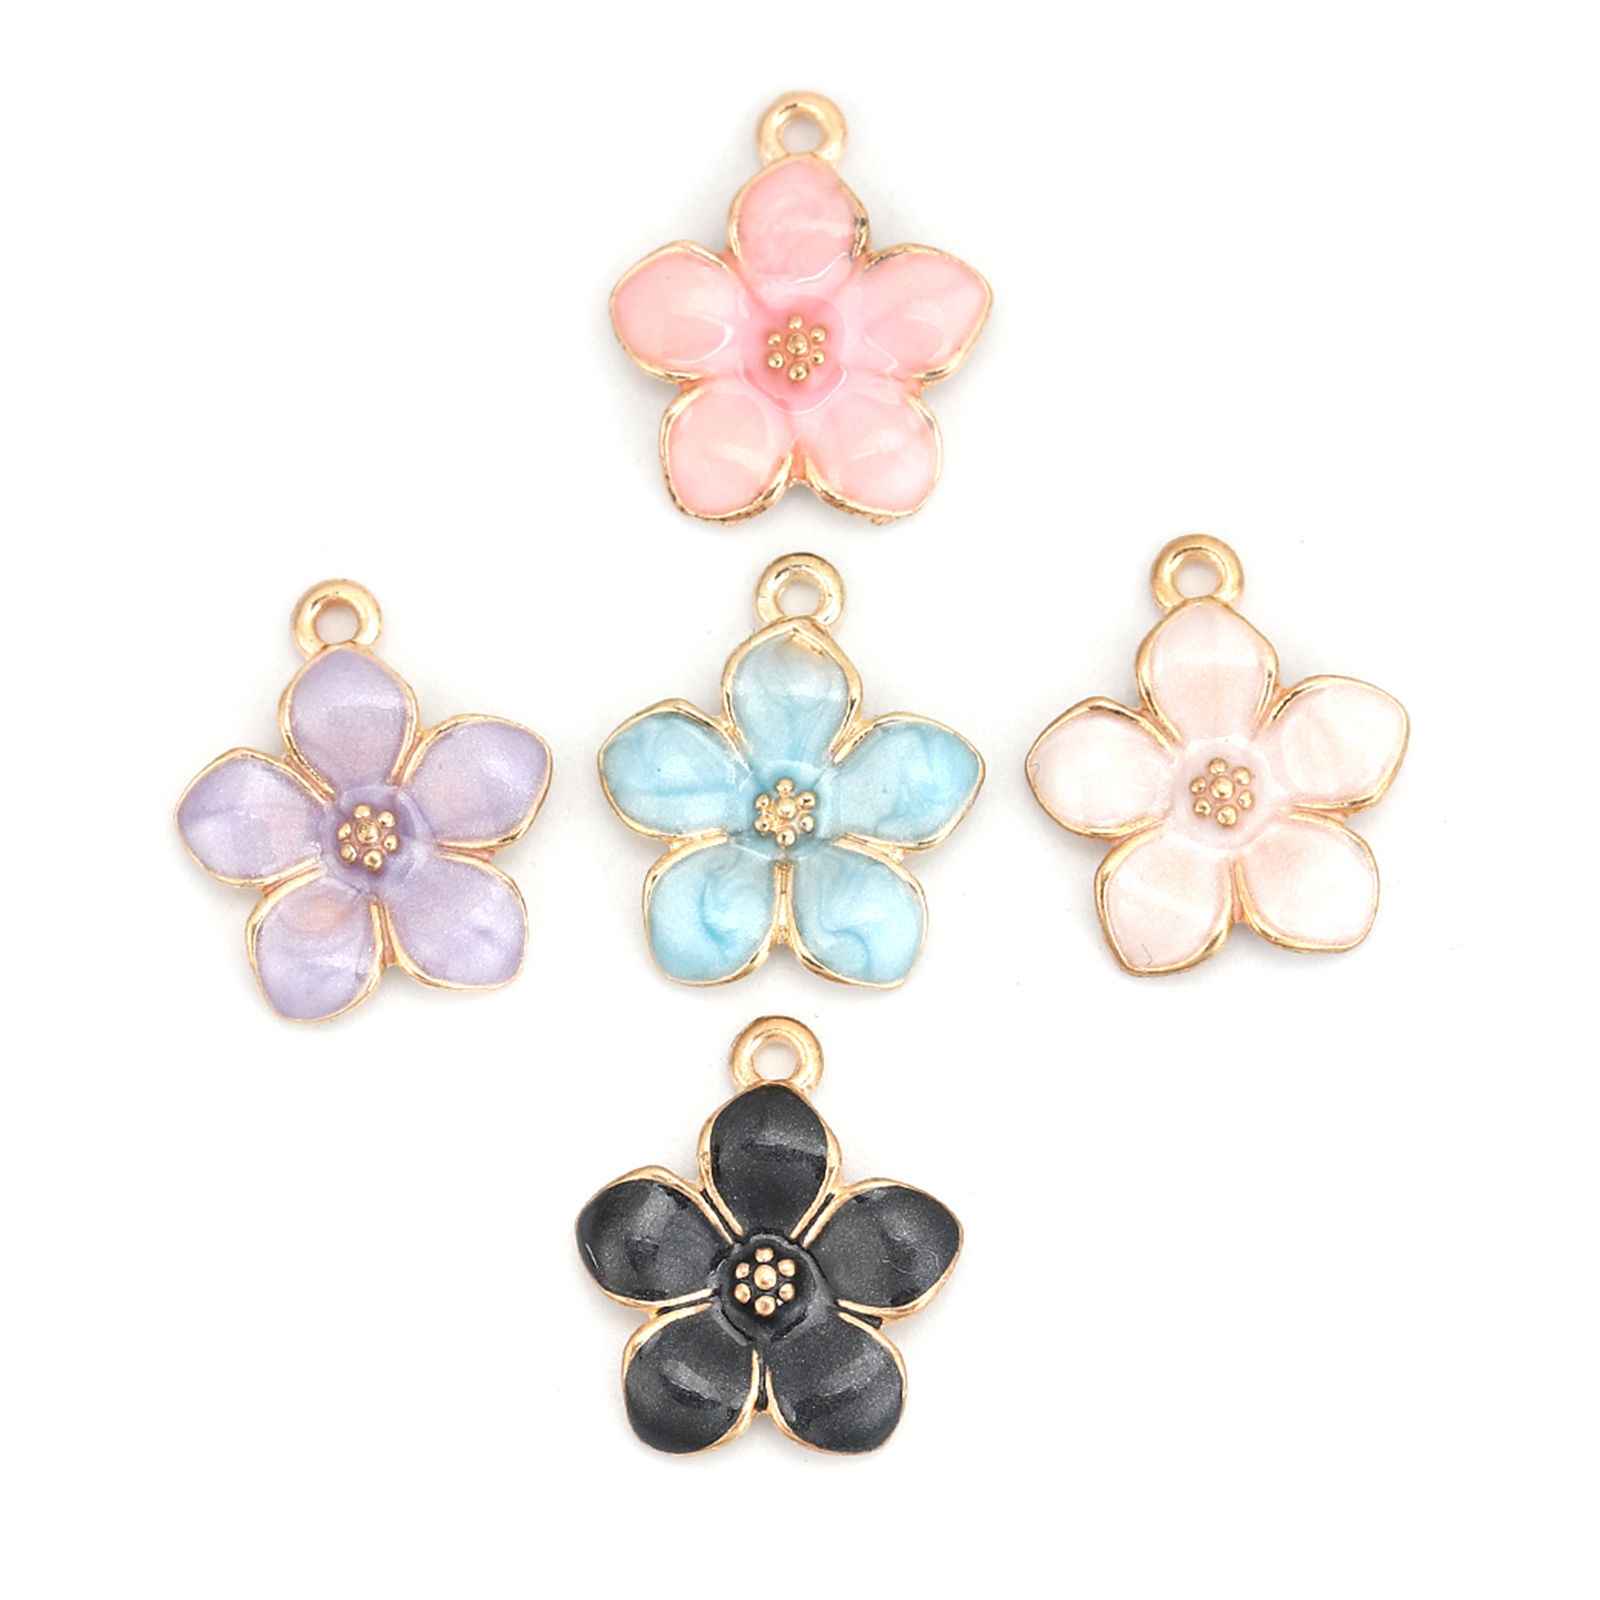 Picture of Zinc Based Alloy Charms Flower Gold Plated Blue Enamel 17mm( 5/8") x 15mm( 5/8"), 20 PCs